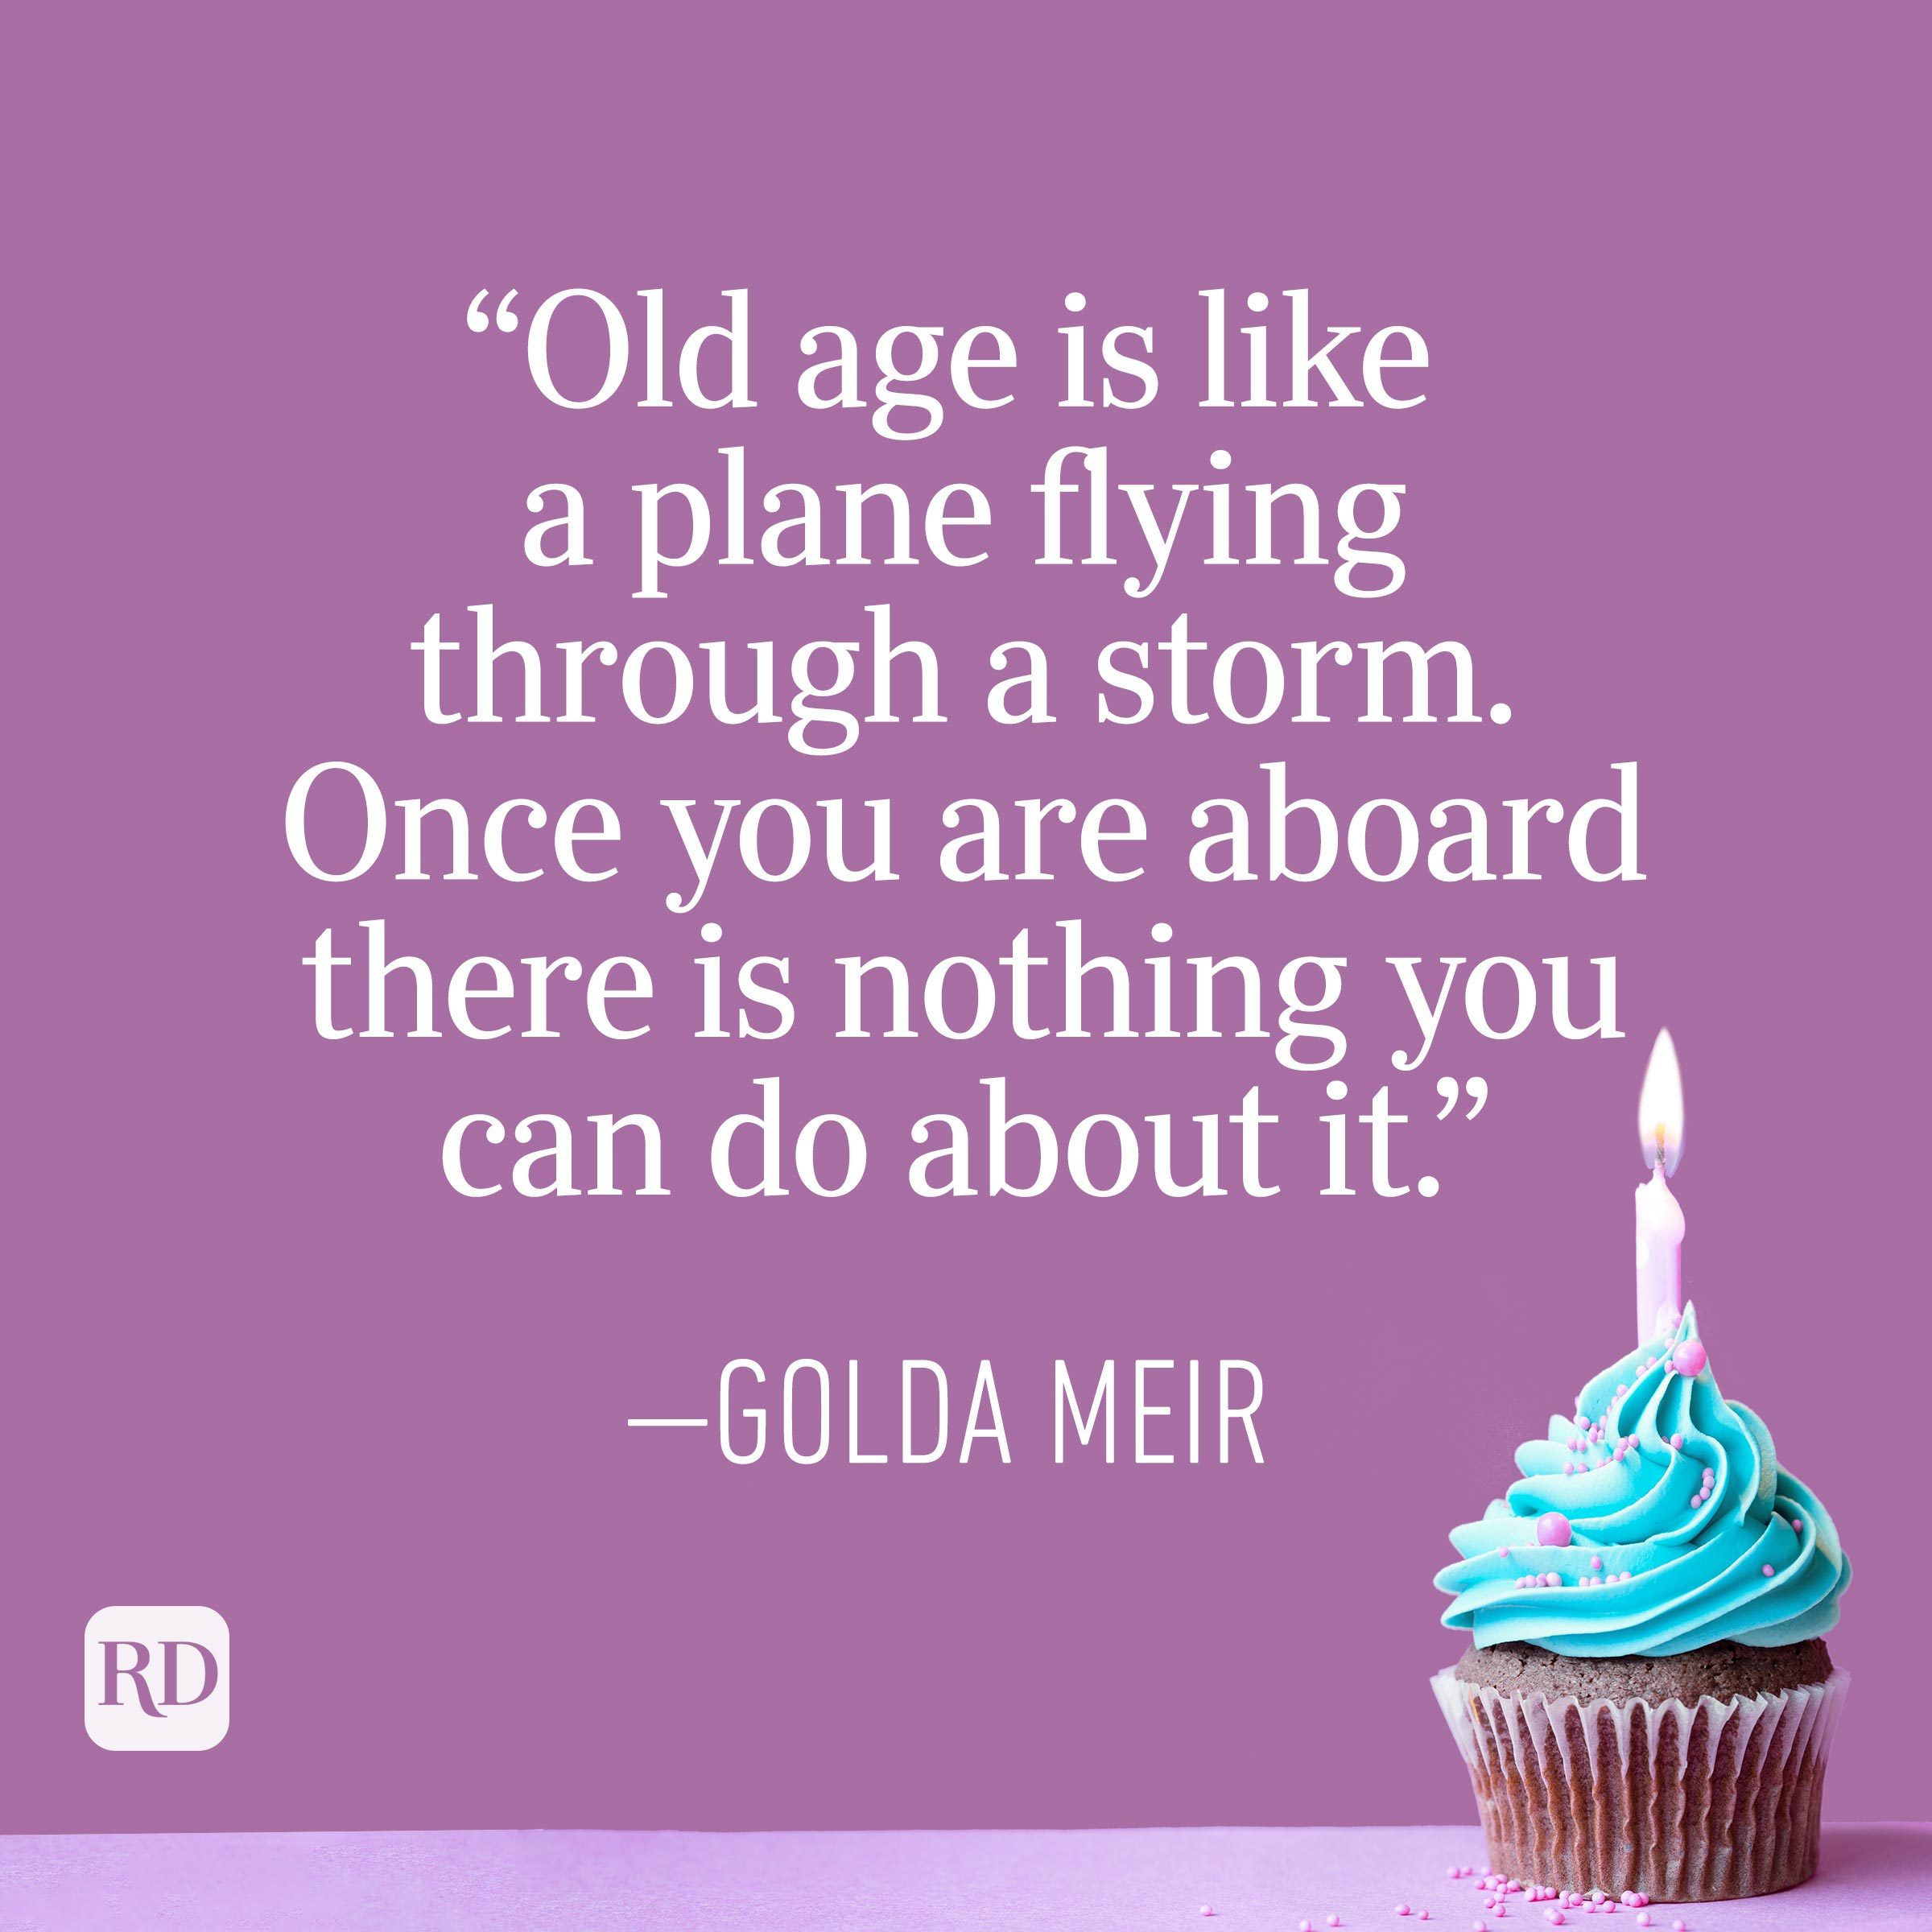 "Old age is like a plane flying through a storm. Once you are aboard there is nothing you can do about it." —Golda Meir